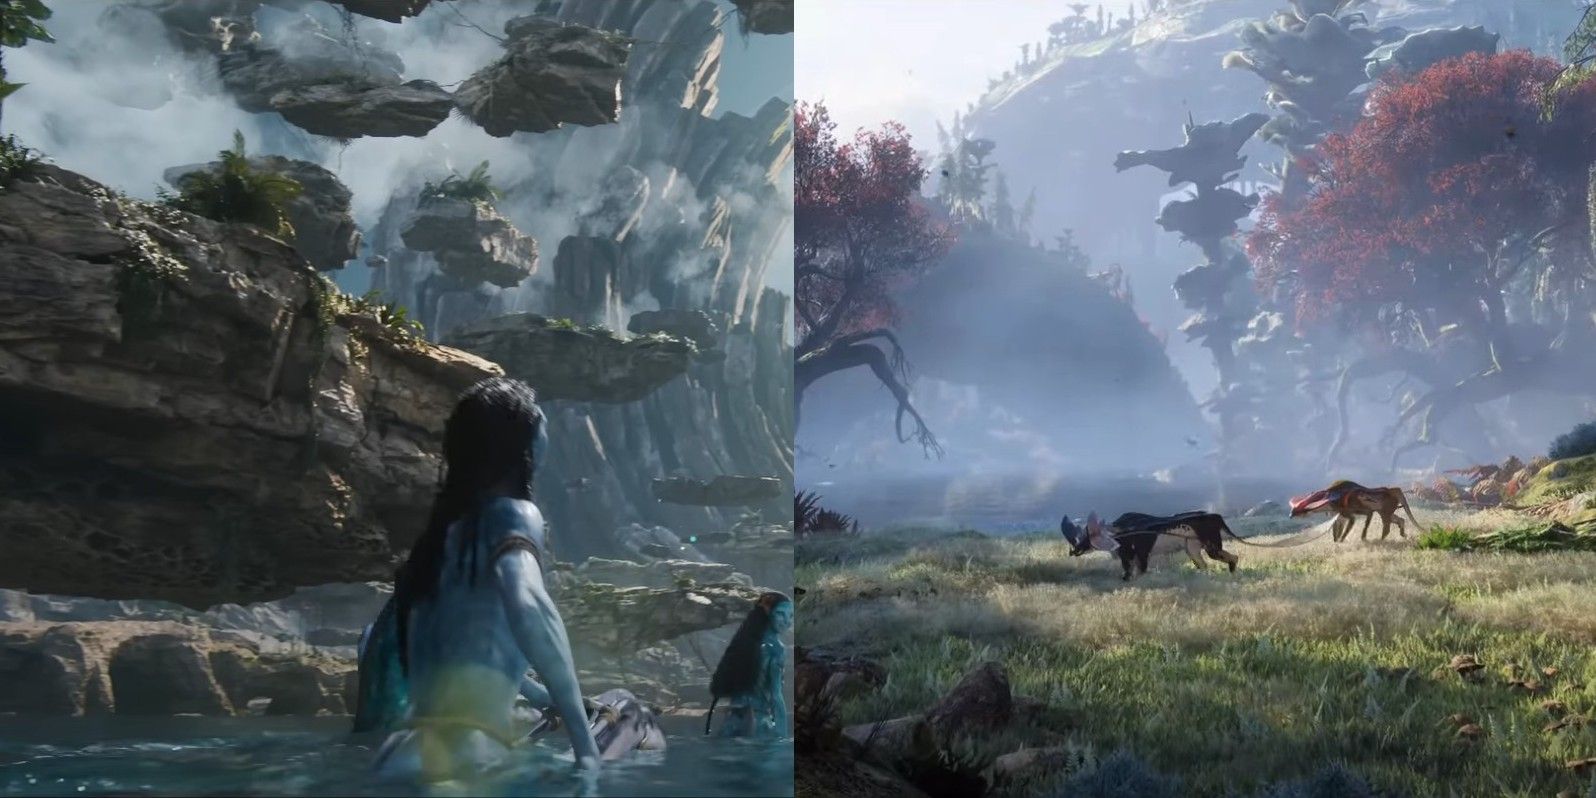 Frontiers of Pandora's CGI Compared To Avatar 2's Trailer